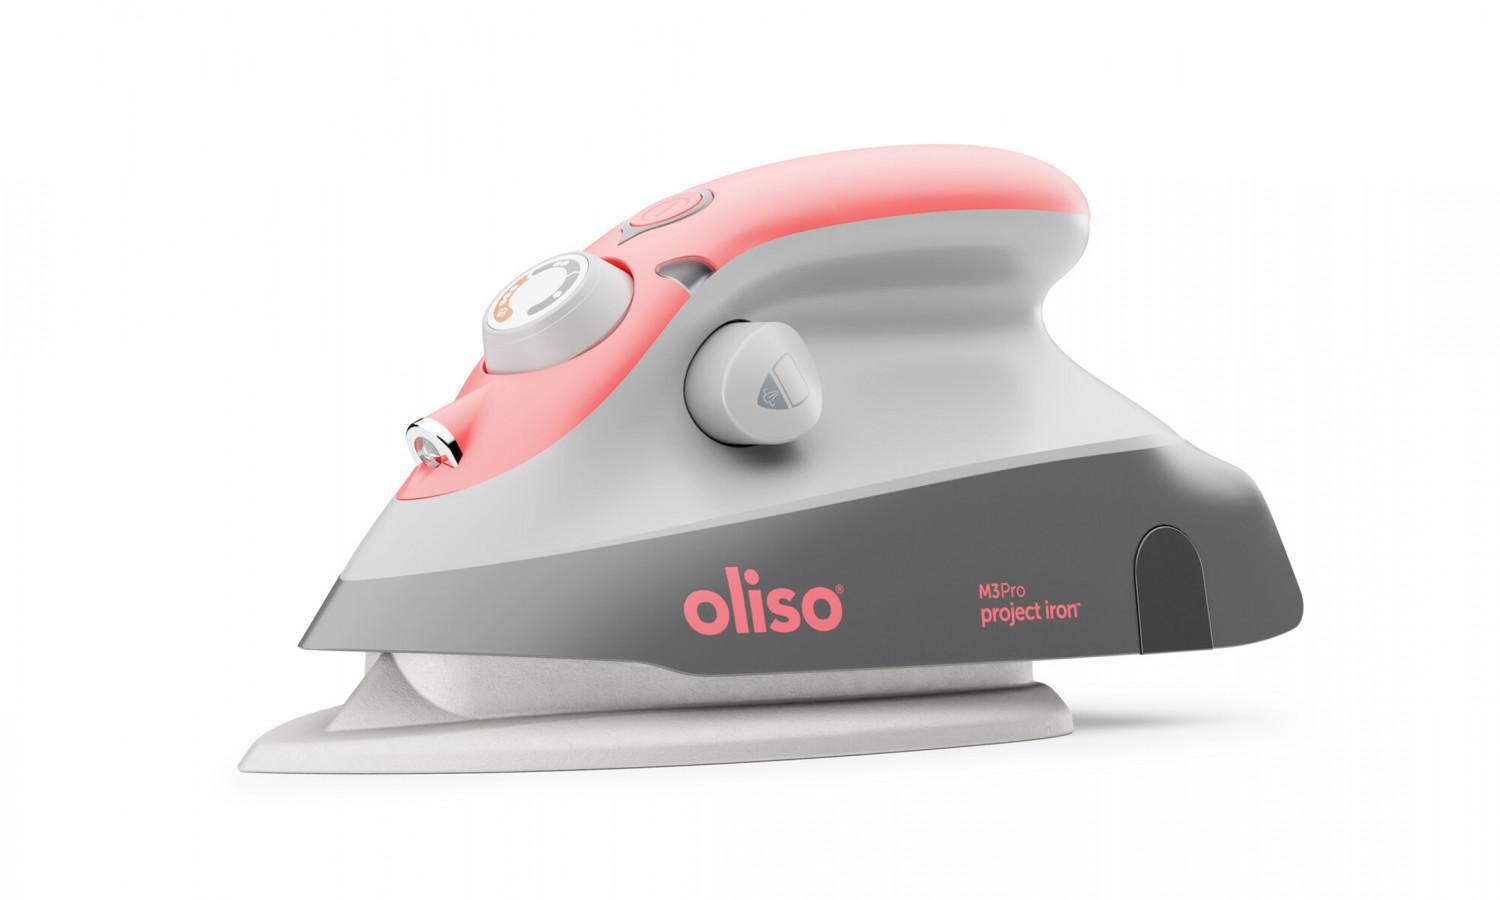 OLISO M3Pro Project Iron - Coral - 5803001